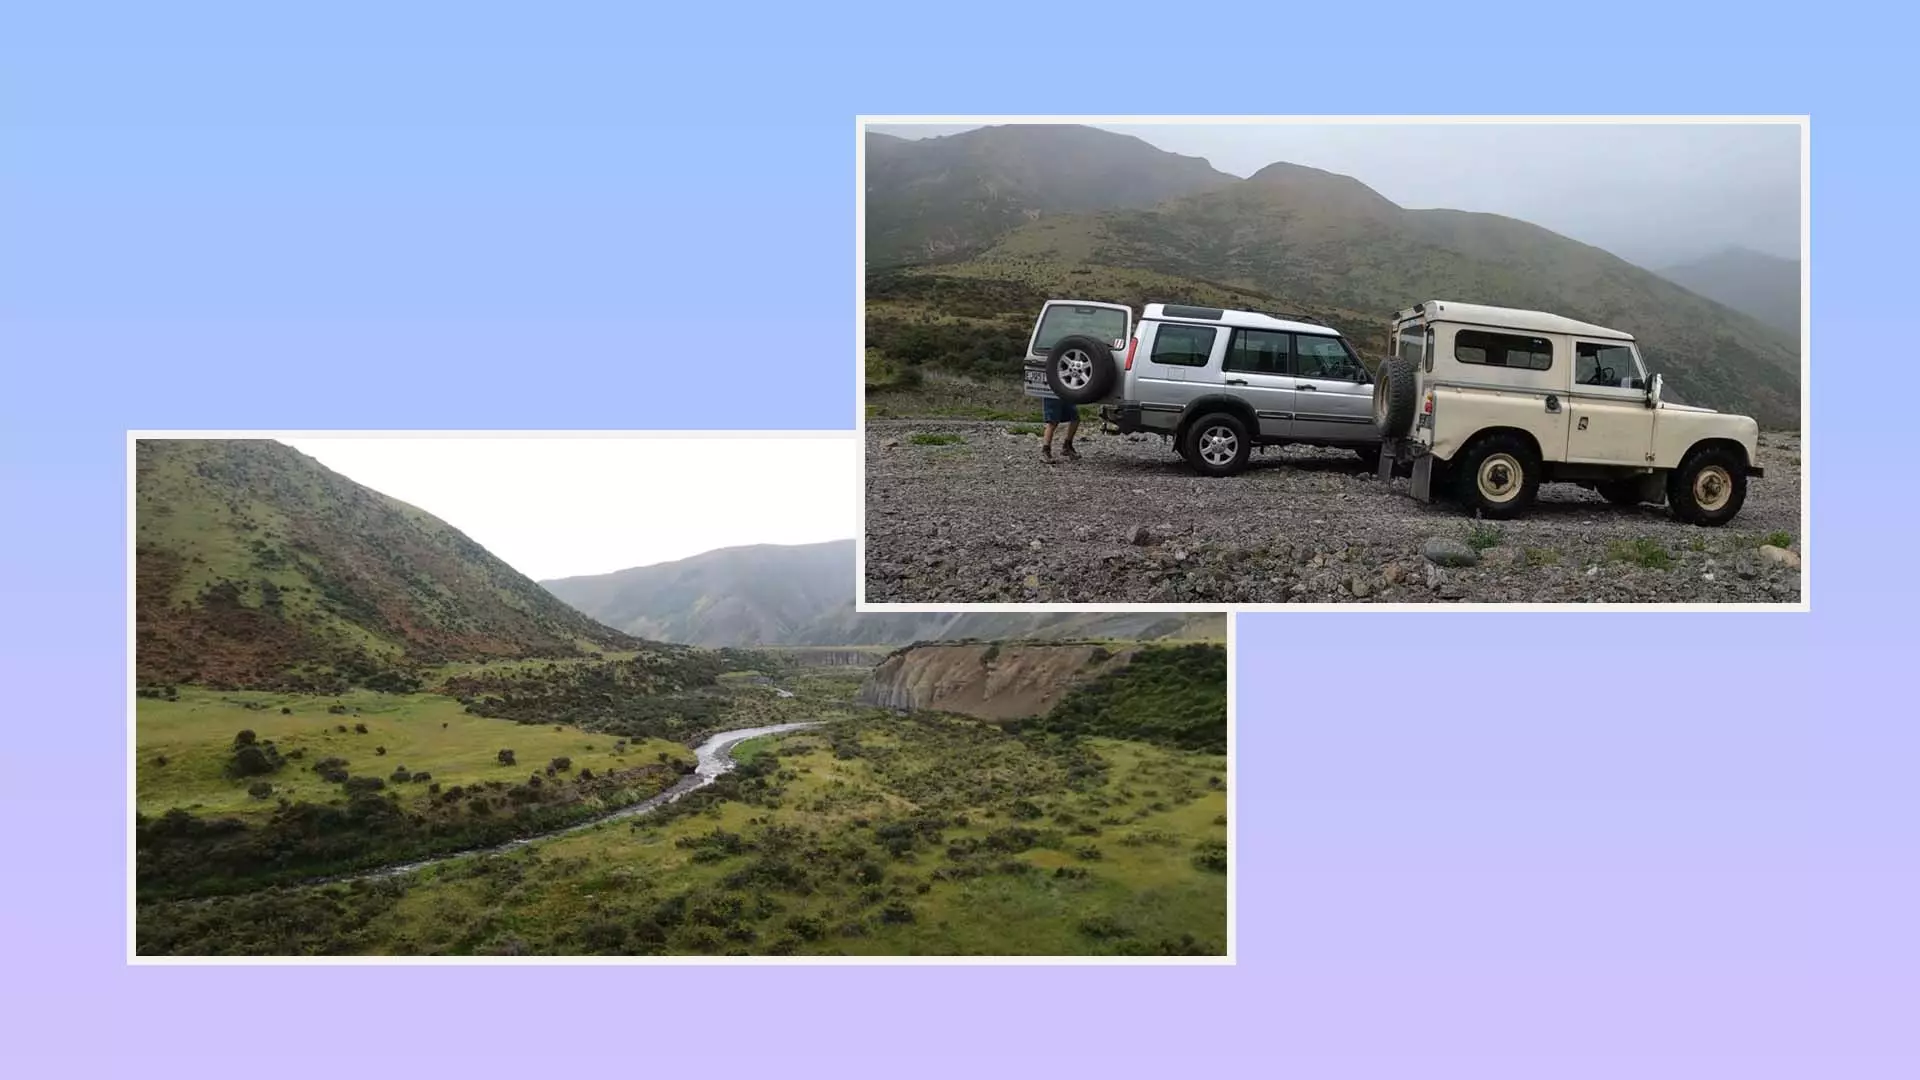 Get Your Fill of Vintage Land Rover Hijinks With This Kiwi&#8217;s Beautiful Channel | Autance